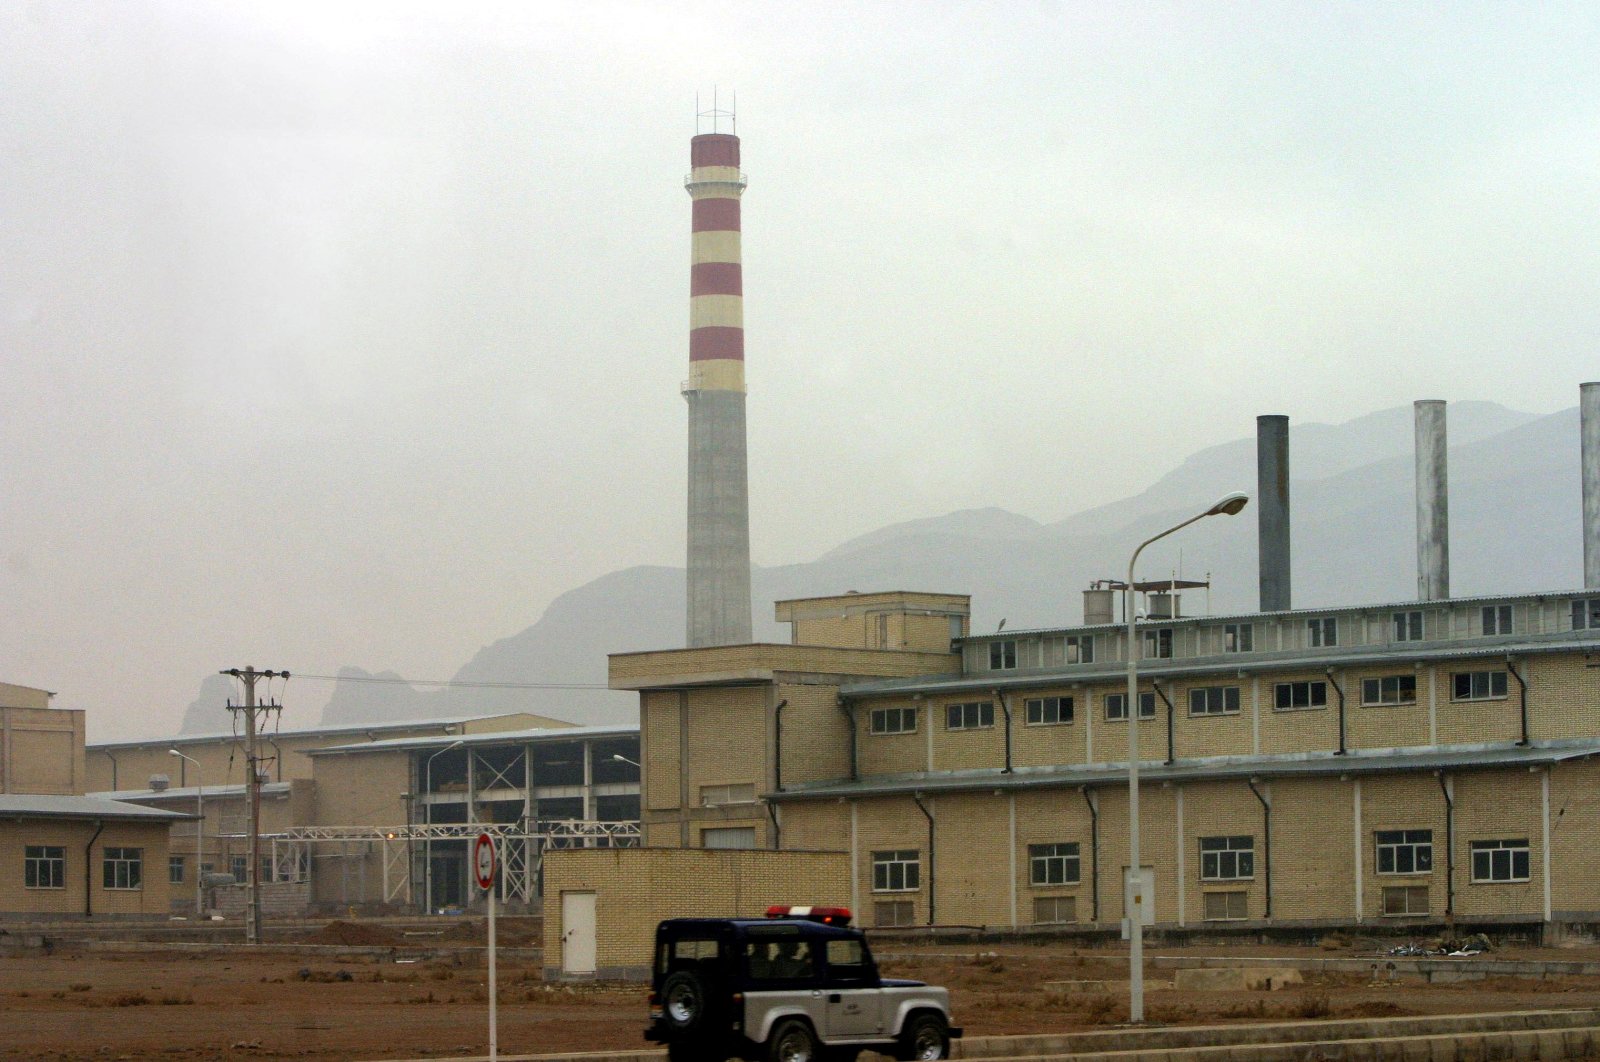 A security car passes in front of the Natanz nuclear facility 300 kilometers south of Tehran, Nov. 20, 2004. (Reuters Photo)